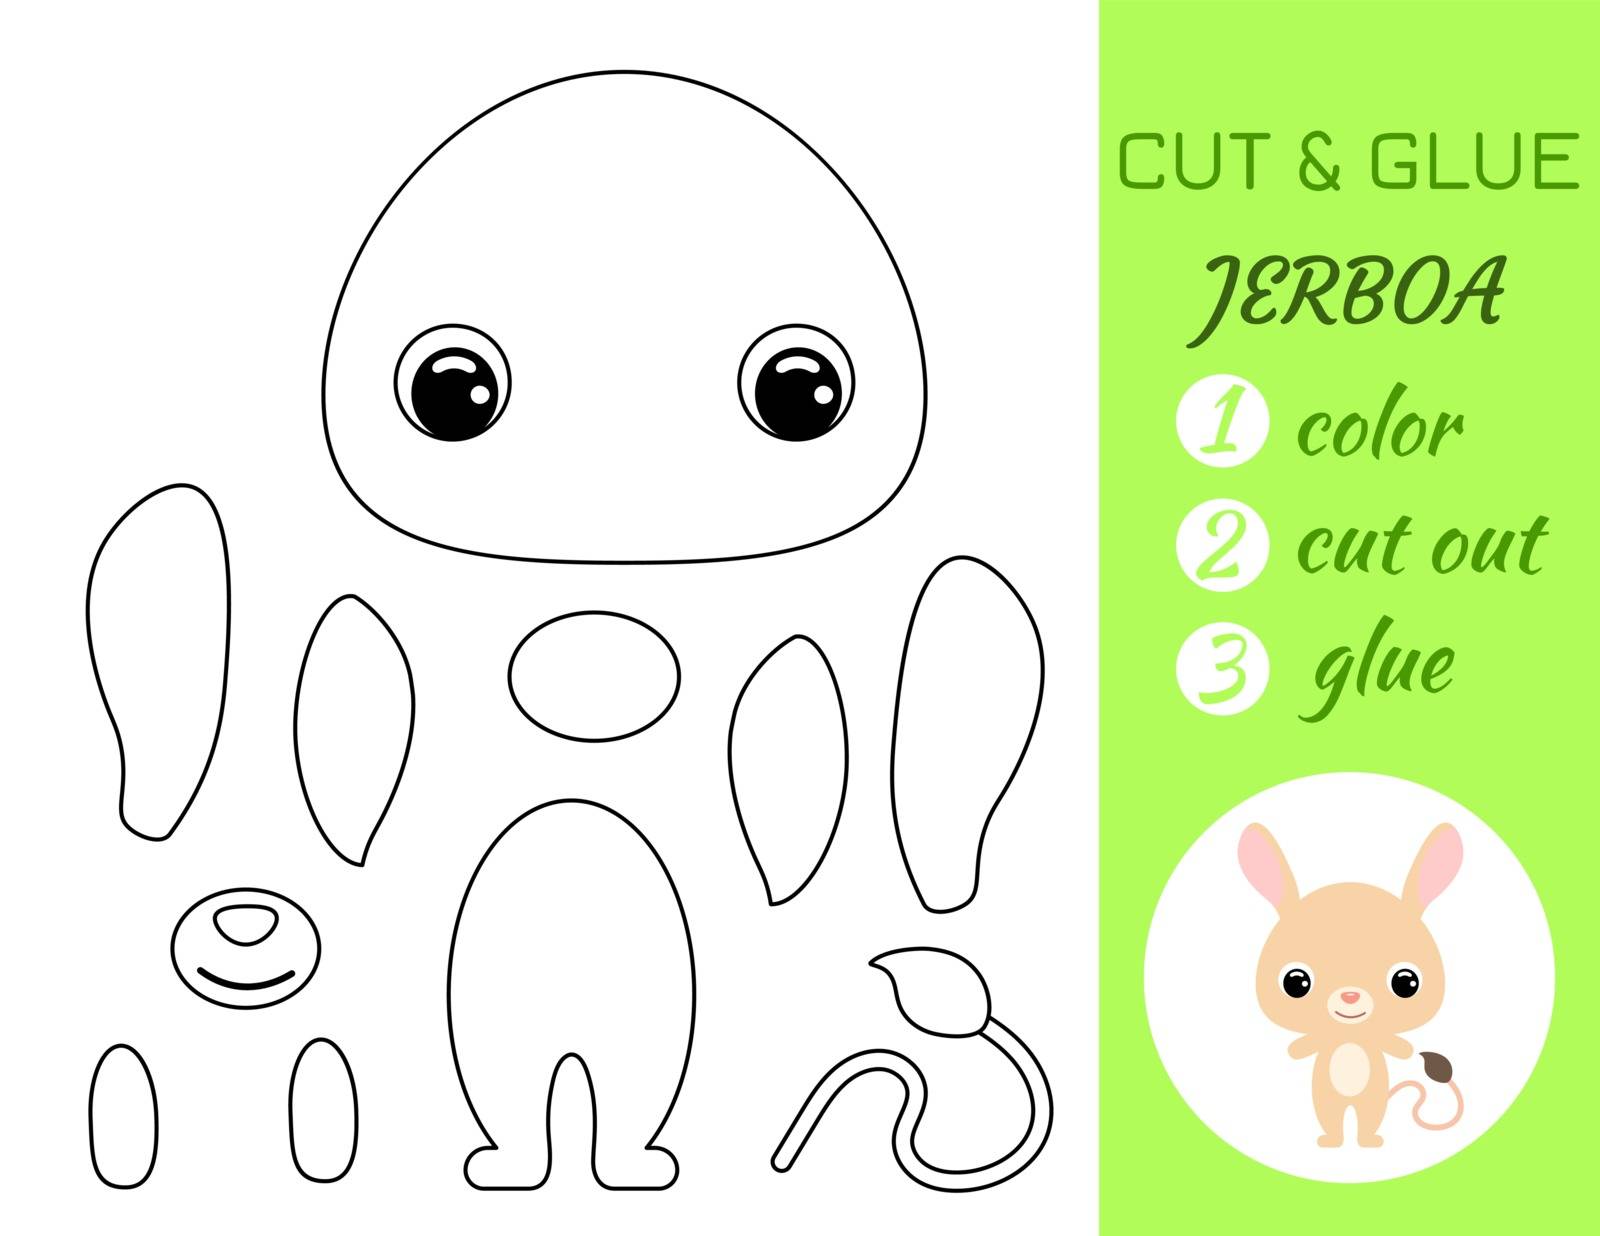 Coloring book cut and glue baby jerboa. Educational paper game f by Melnyk